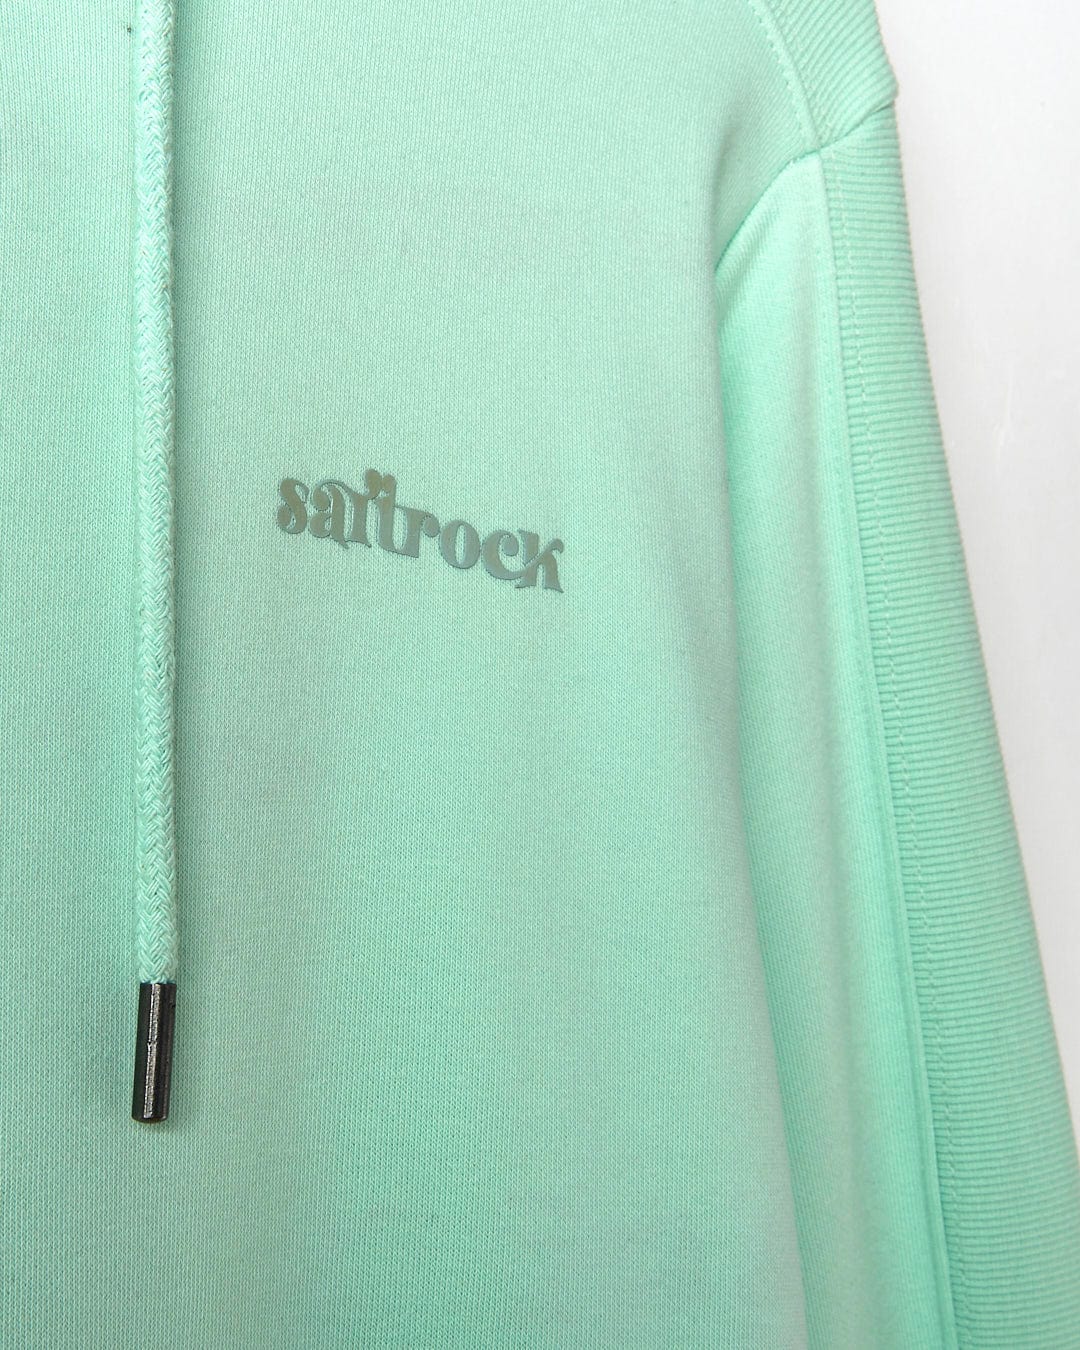 A Shelley - Womens Pop Hoodie - Light Green with the brand name Saltrock on it.